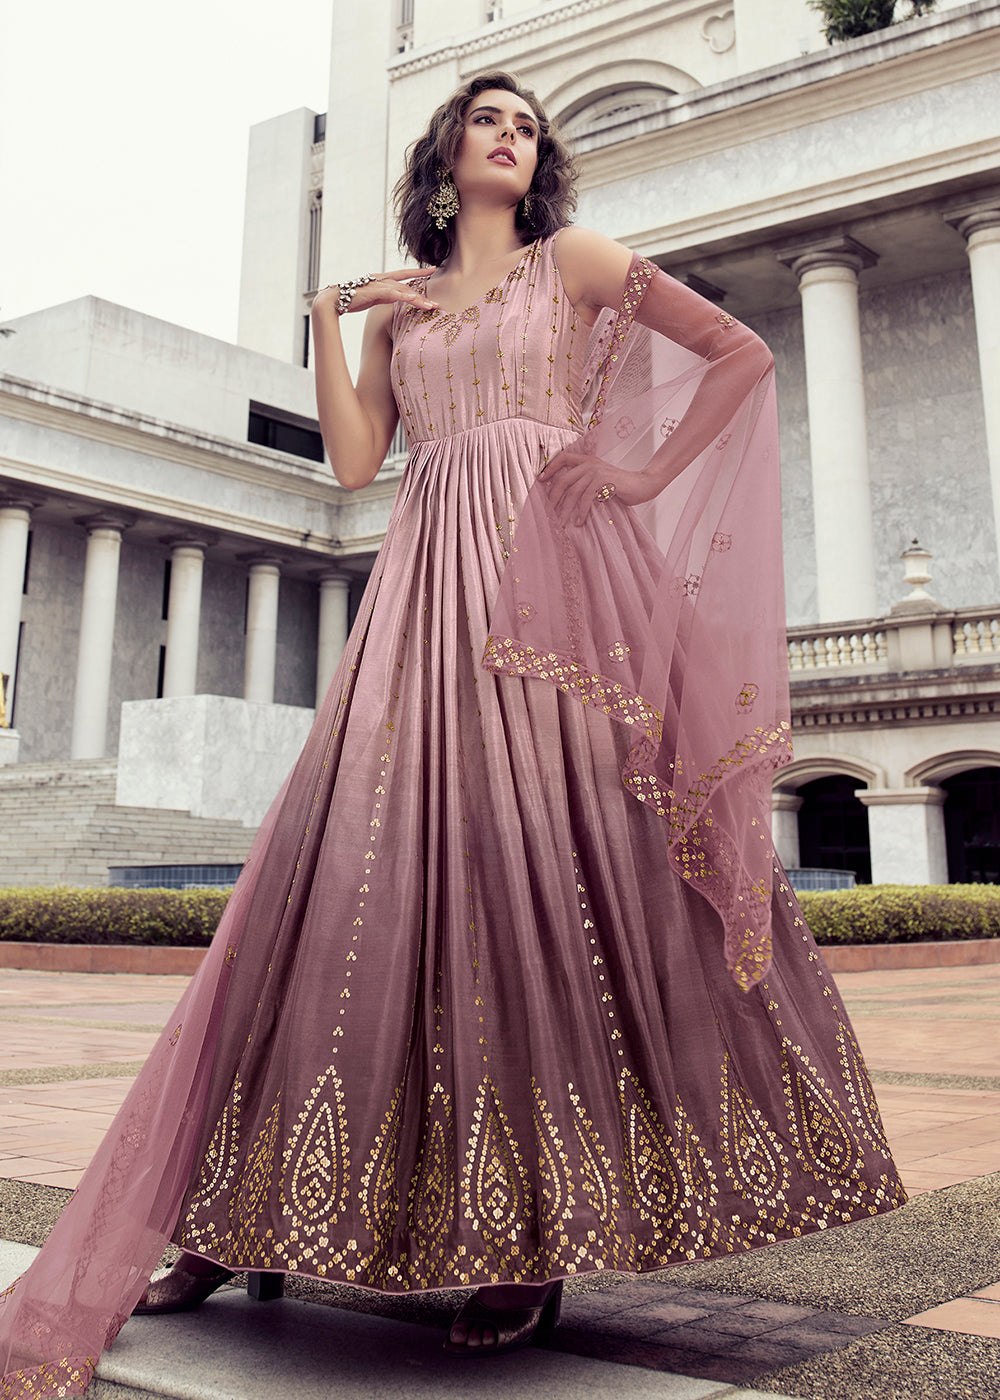 Buy Now Irresistible Dusty Pink Chinon Reception Wear Gown Online in USA, UK, Australia, New Zealand, Canada & Worldwide at Empress Clothing.